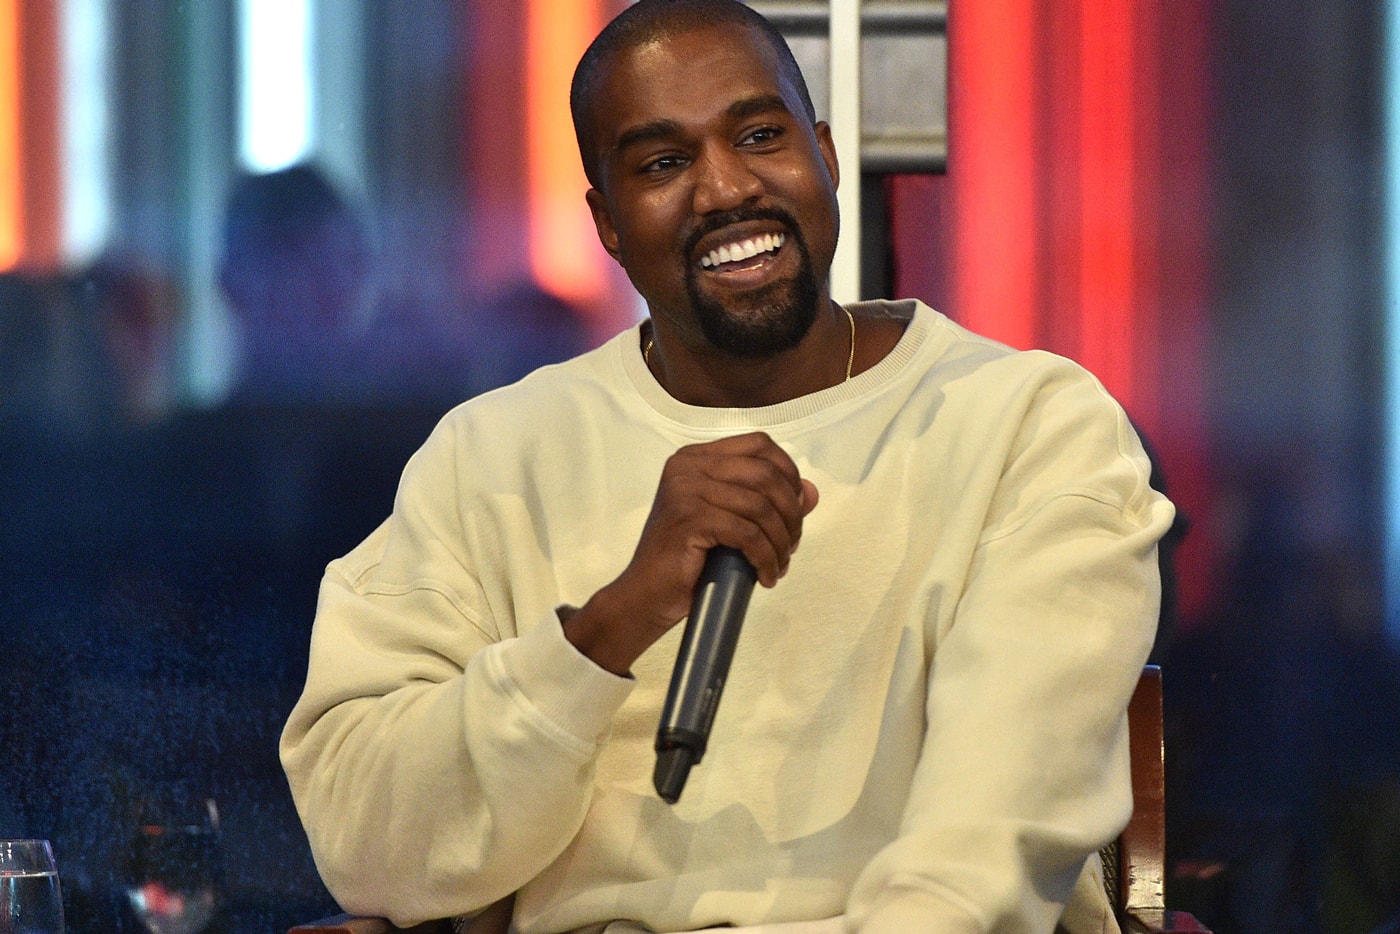 kanye-west-wants-to-return-to-real-hip-hop-with-new-album